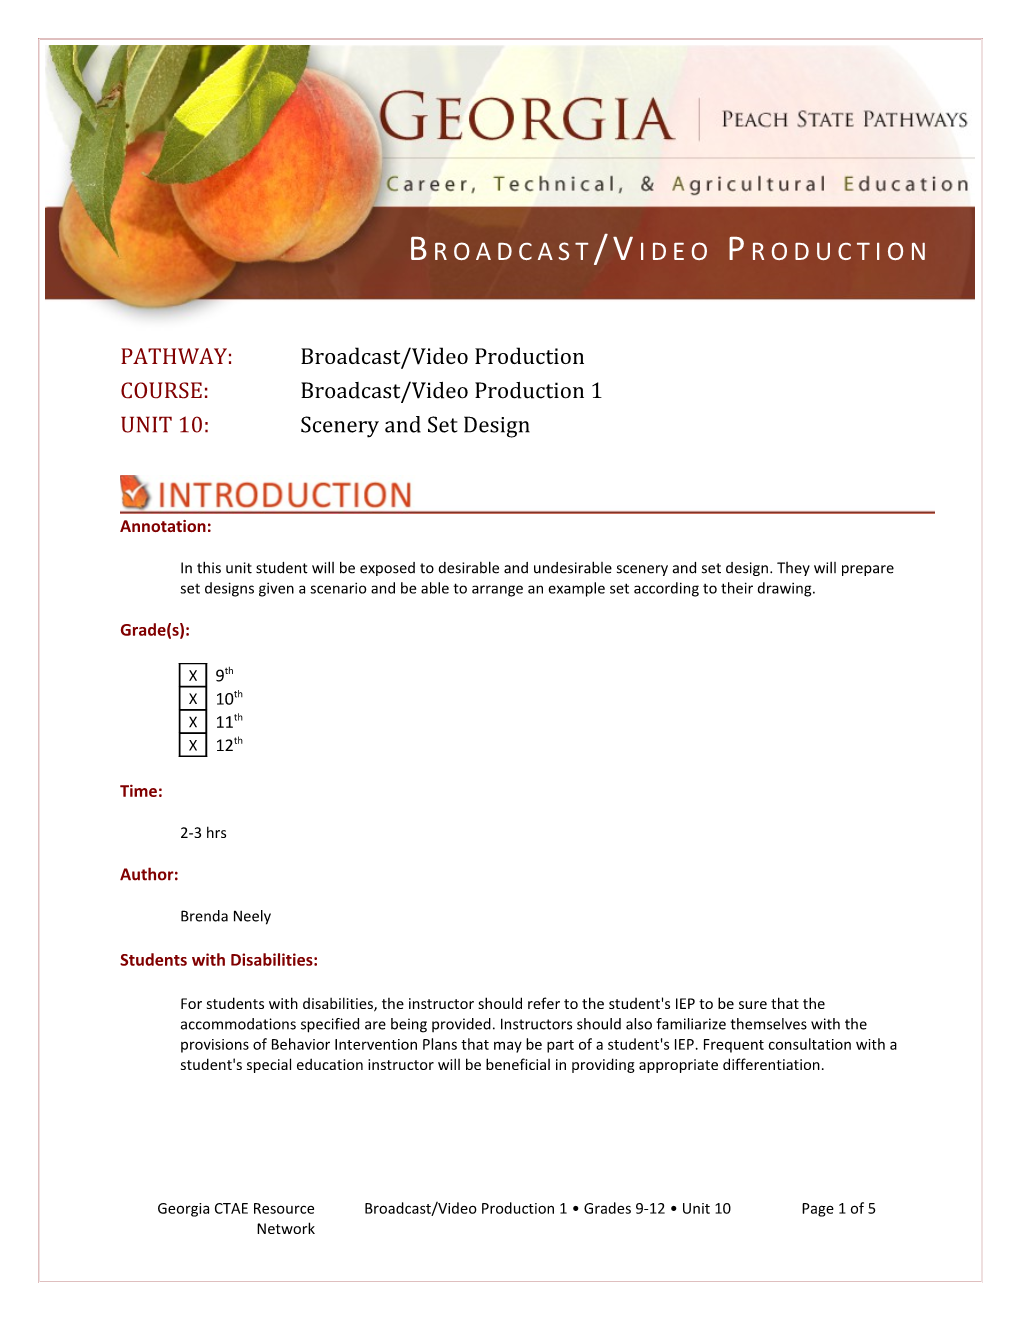 COURSE: Broadcast/Video Production 1